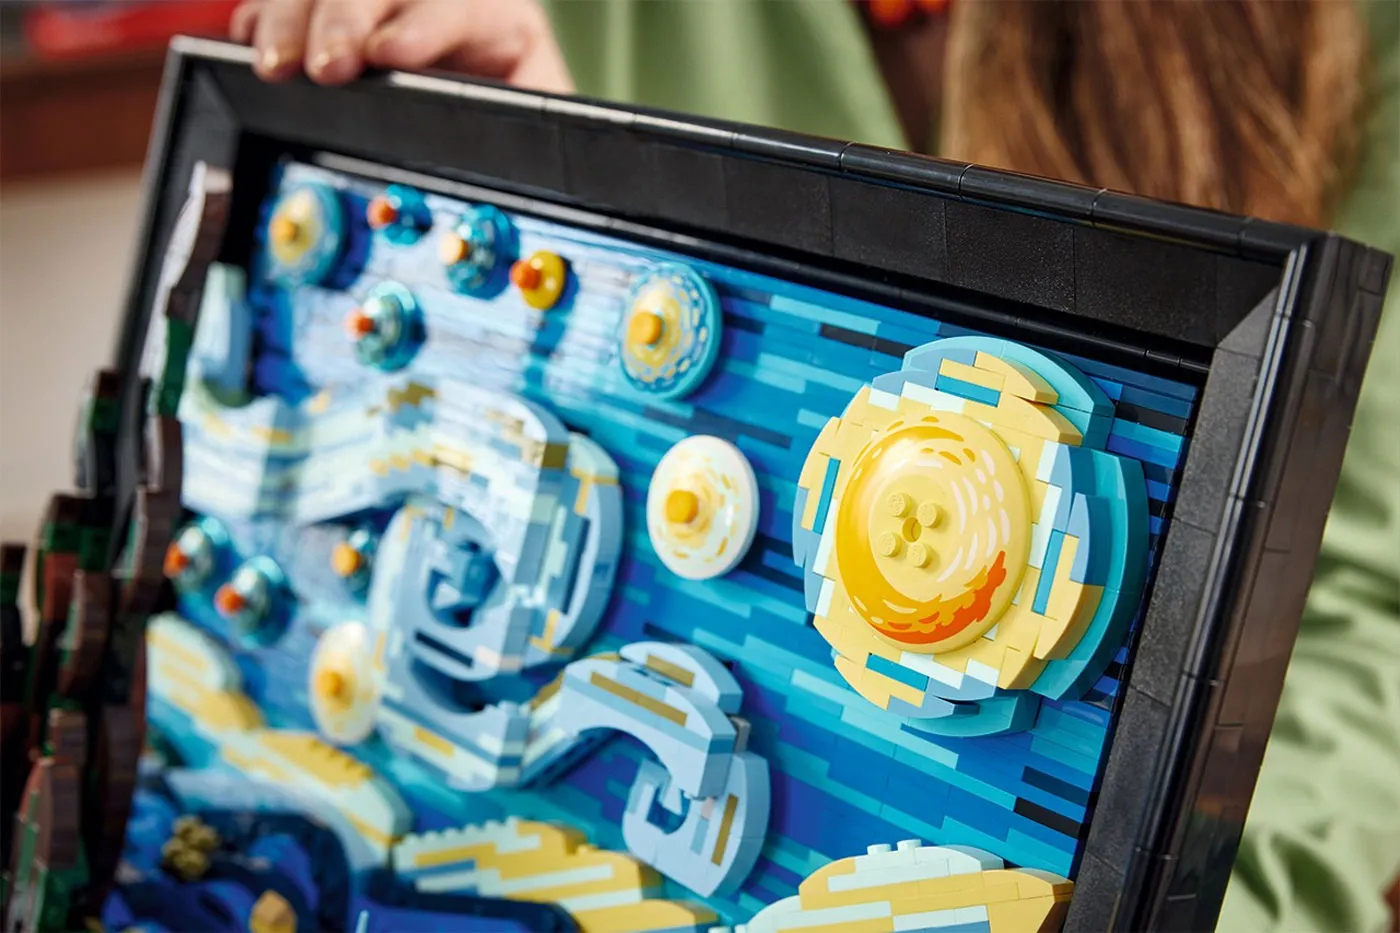 lego vincent van gogh the starry night set release info 003